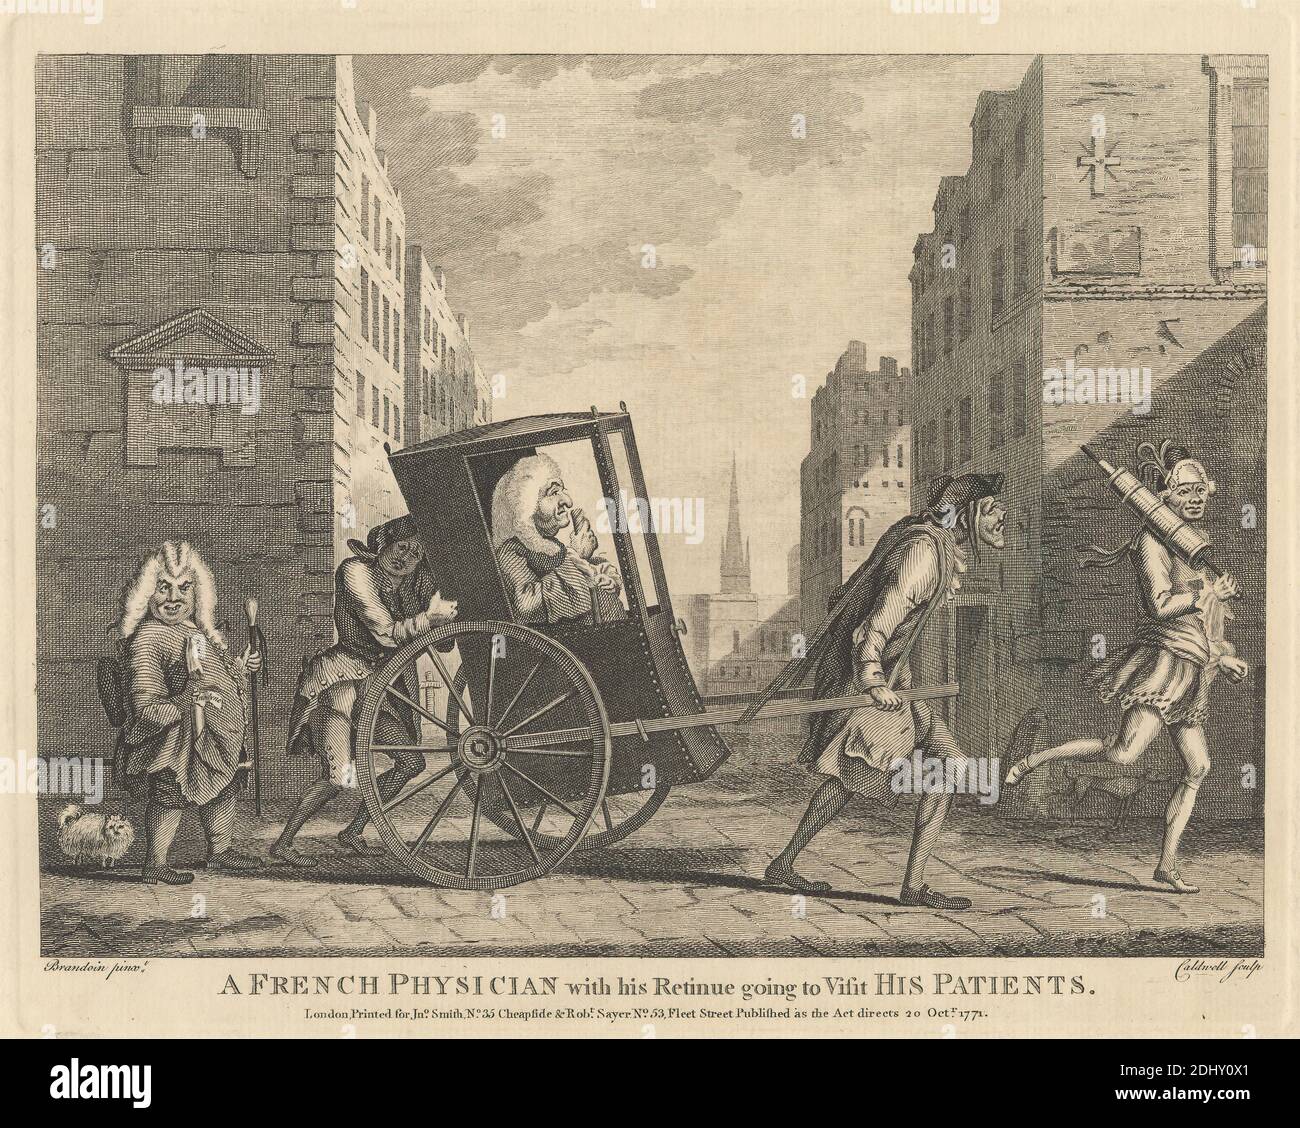 A French Physician with His Retinue Going to Visit His Patients, Print made by James Caldwall, 1739–1819, British, after Michel Vincent Brandoin, 1733–1807, Swiss, Published by Robert Sayer, 1725–1794, British, and John Smith of Cheapside, active ca. 1750–1789, British, 1771, Line engraving and etching on moderately thick, moderately textured, beige laid paper, Sheet: 11 1/16 x 13 3/4 inches (28.1 x 35 cm), Plate: 7 7/8 x 9 13/16 inches (20 x 25 cm), and Image: 7 1/16 x 9 1/2 inches (17.9 x 24.1 cm), architectural subject, architecture, assistants, bottle, breeches (trousers), buildings, canes Stock Photo